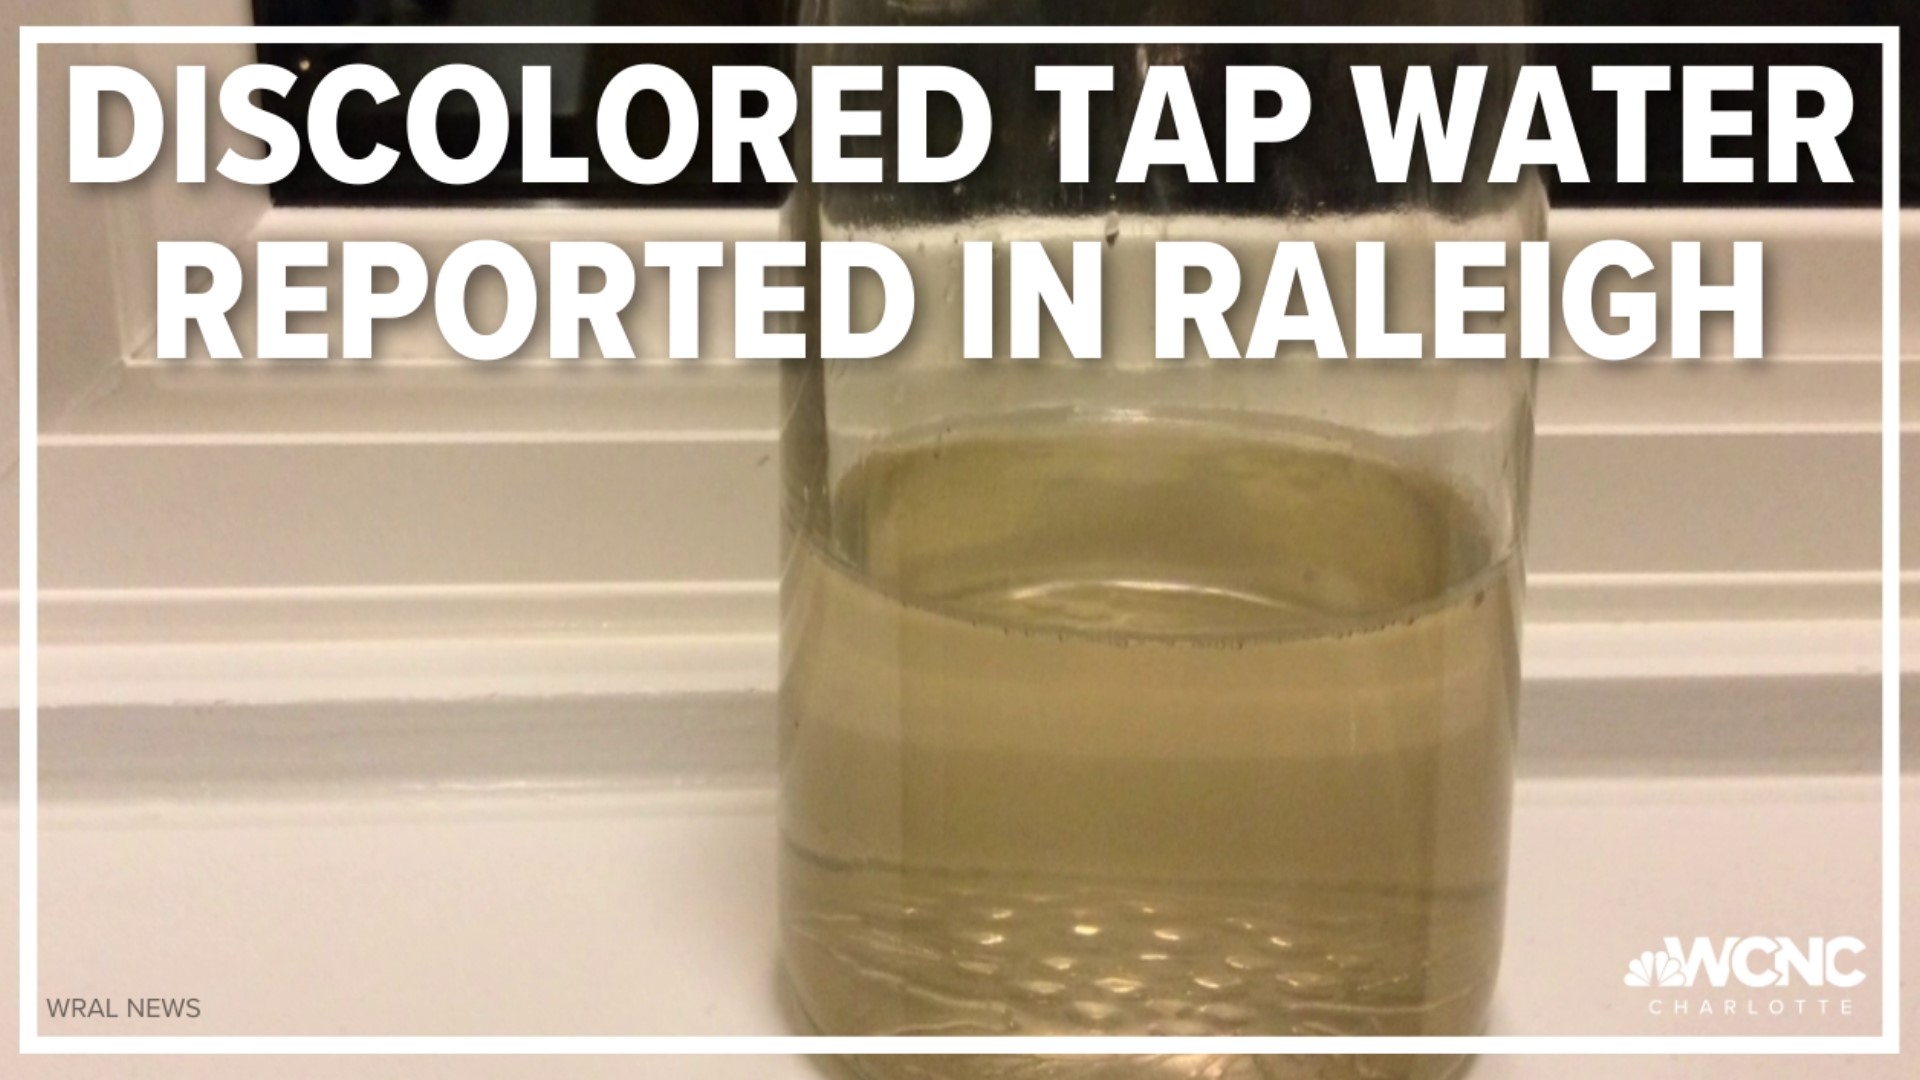 A spokesperson with Raleigh Water said the issue is more of an aesthetic one than a safety concern, adding the water is safe to drink without having to boil it.